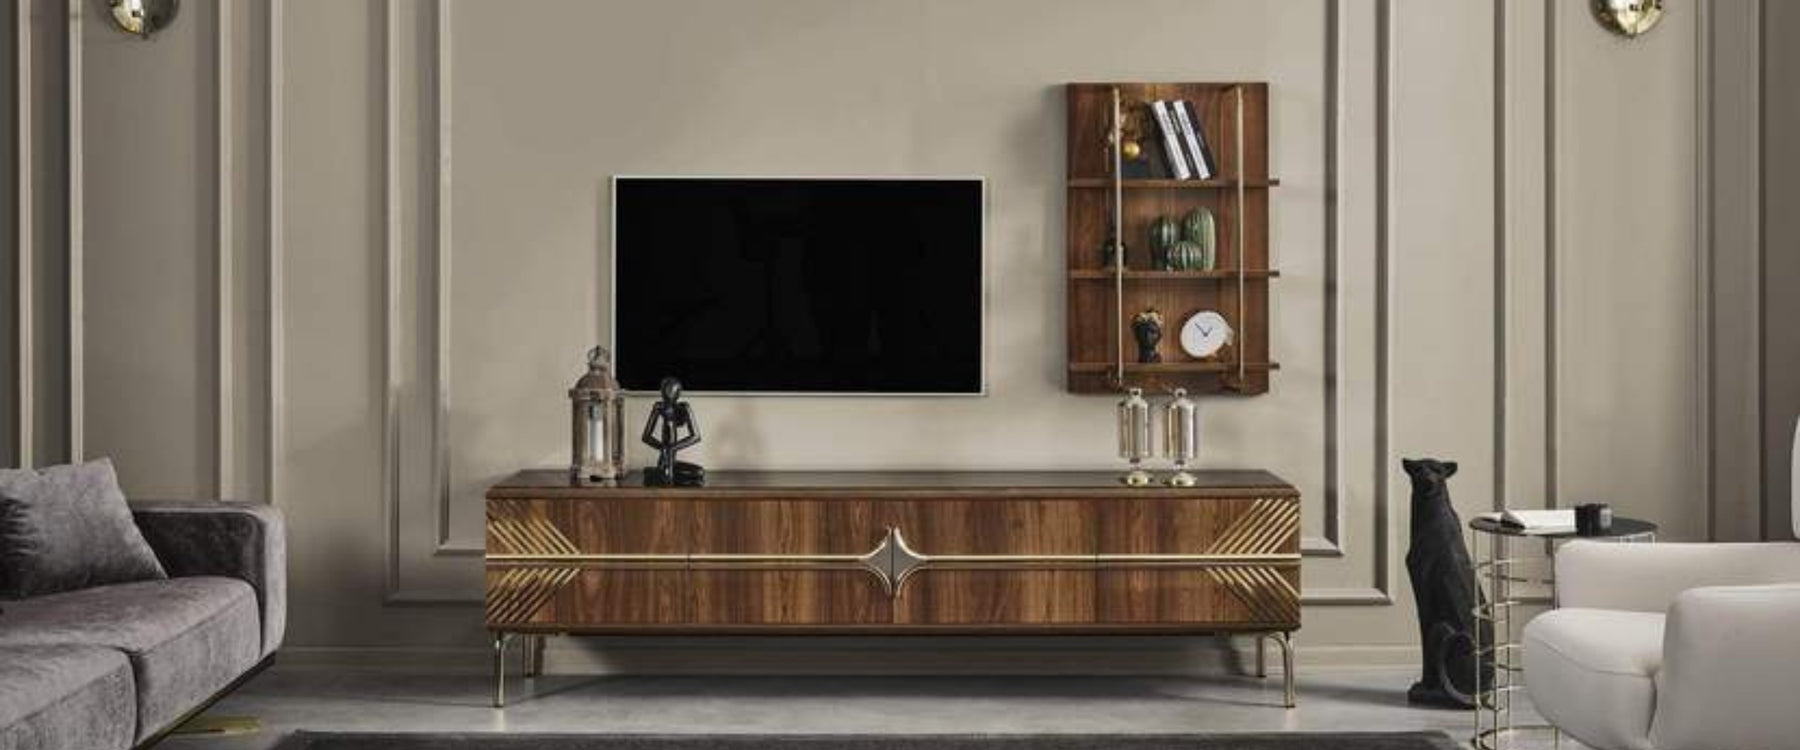 TV Set Decoration Ideas That Will Increase Your Enjoyment of Watching